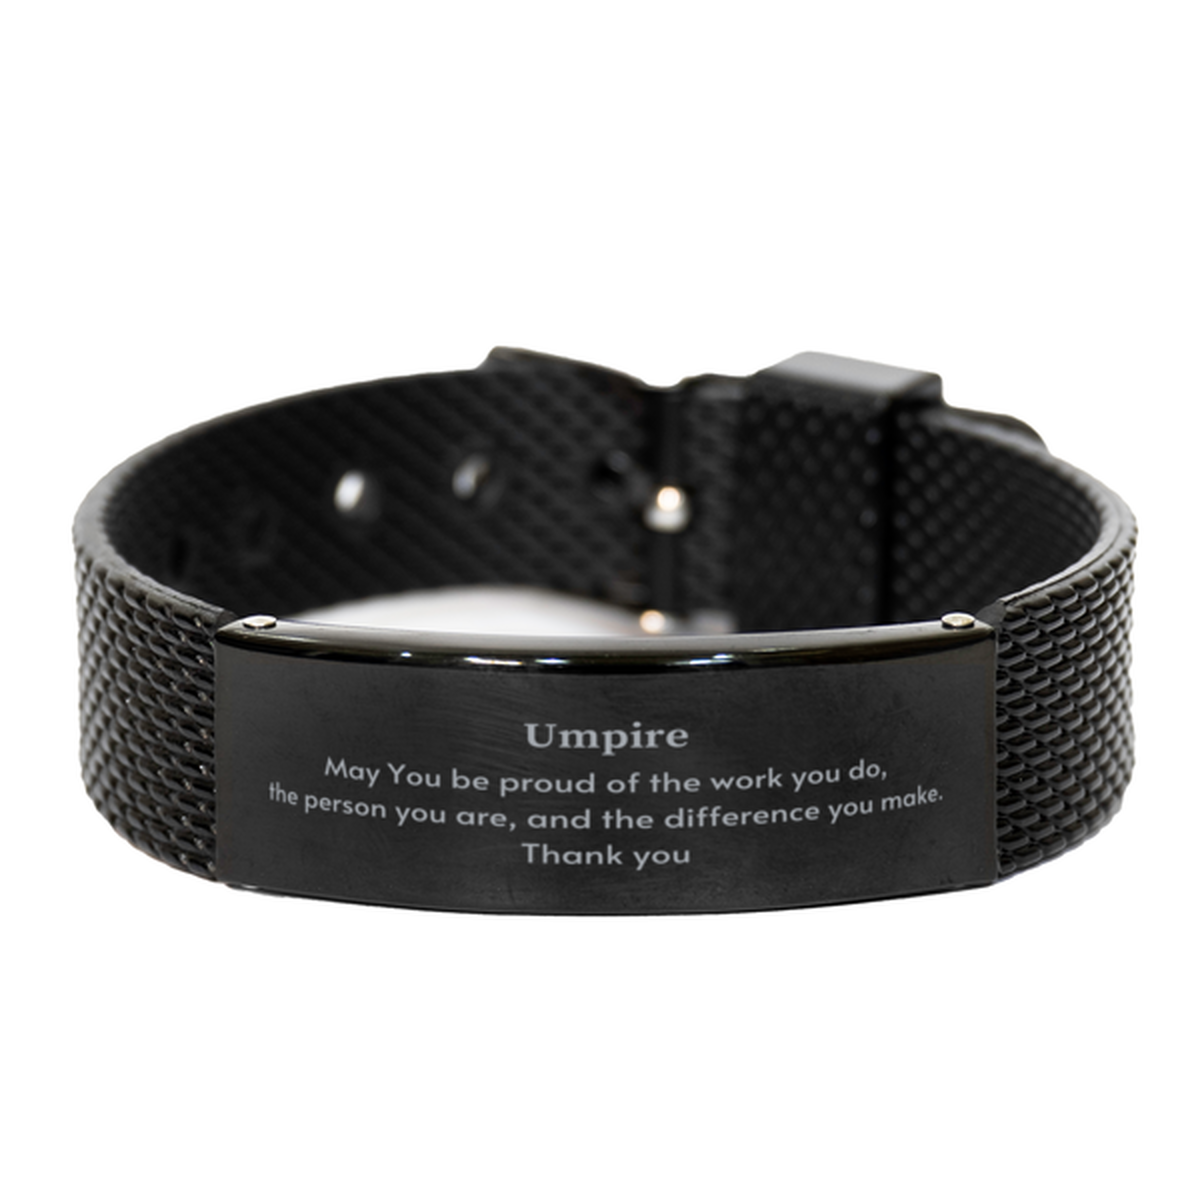 Heartwarming Black Shark Mesh Bracelet Retirement Coworkers Gifts for Umpire, Umpire May You be proud of the work you do, the person you are Gifts for Boss Men Women Friends